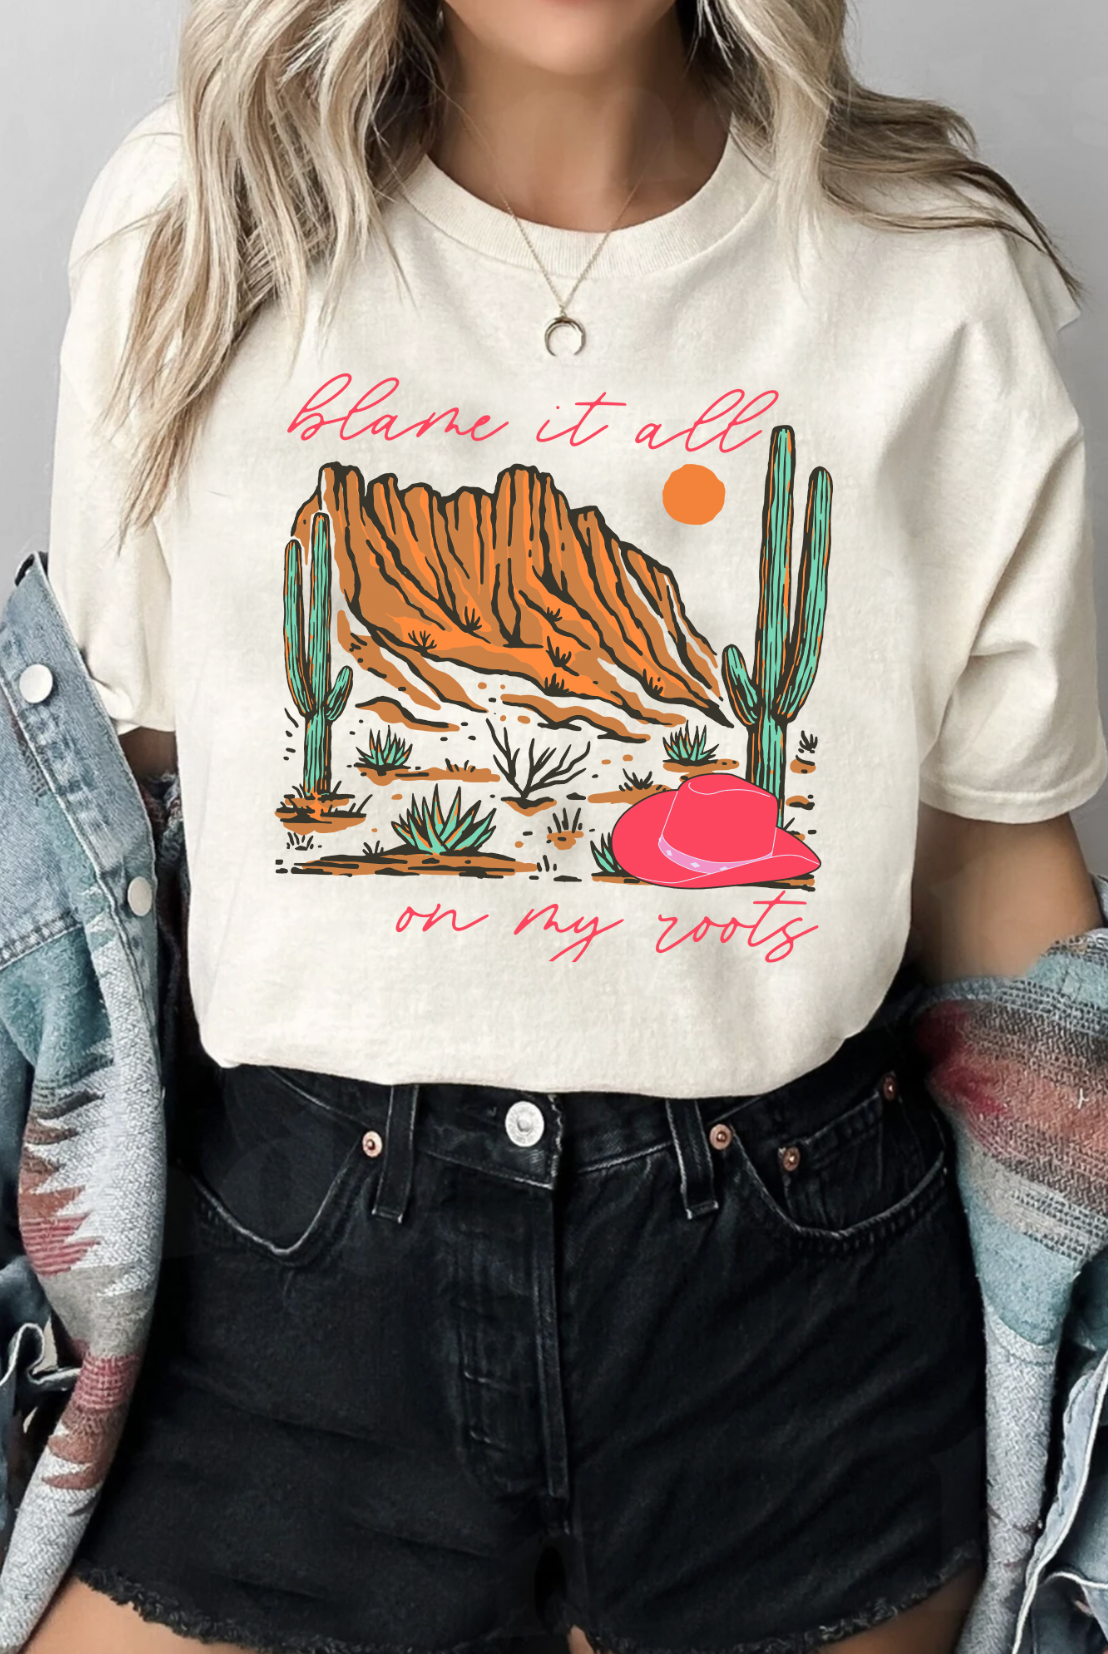 Blame it all on my roots. Bella and Canvas soft tee in Cream. Hand made and shipped from Texas.